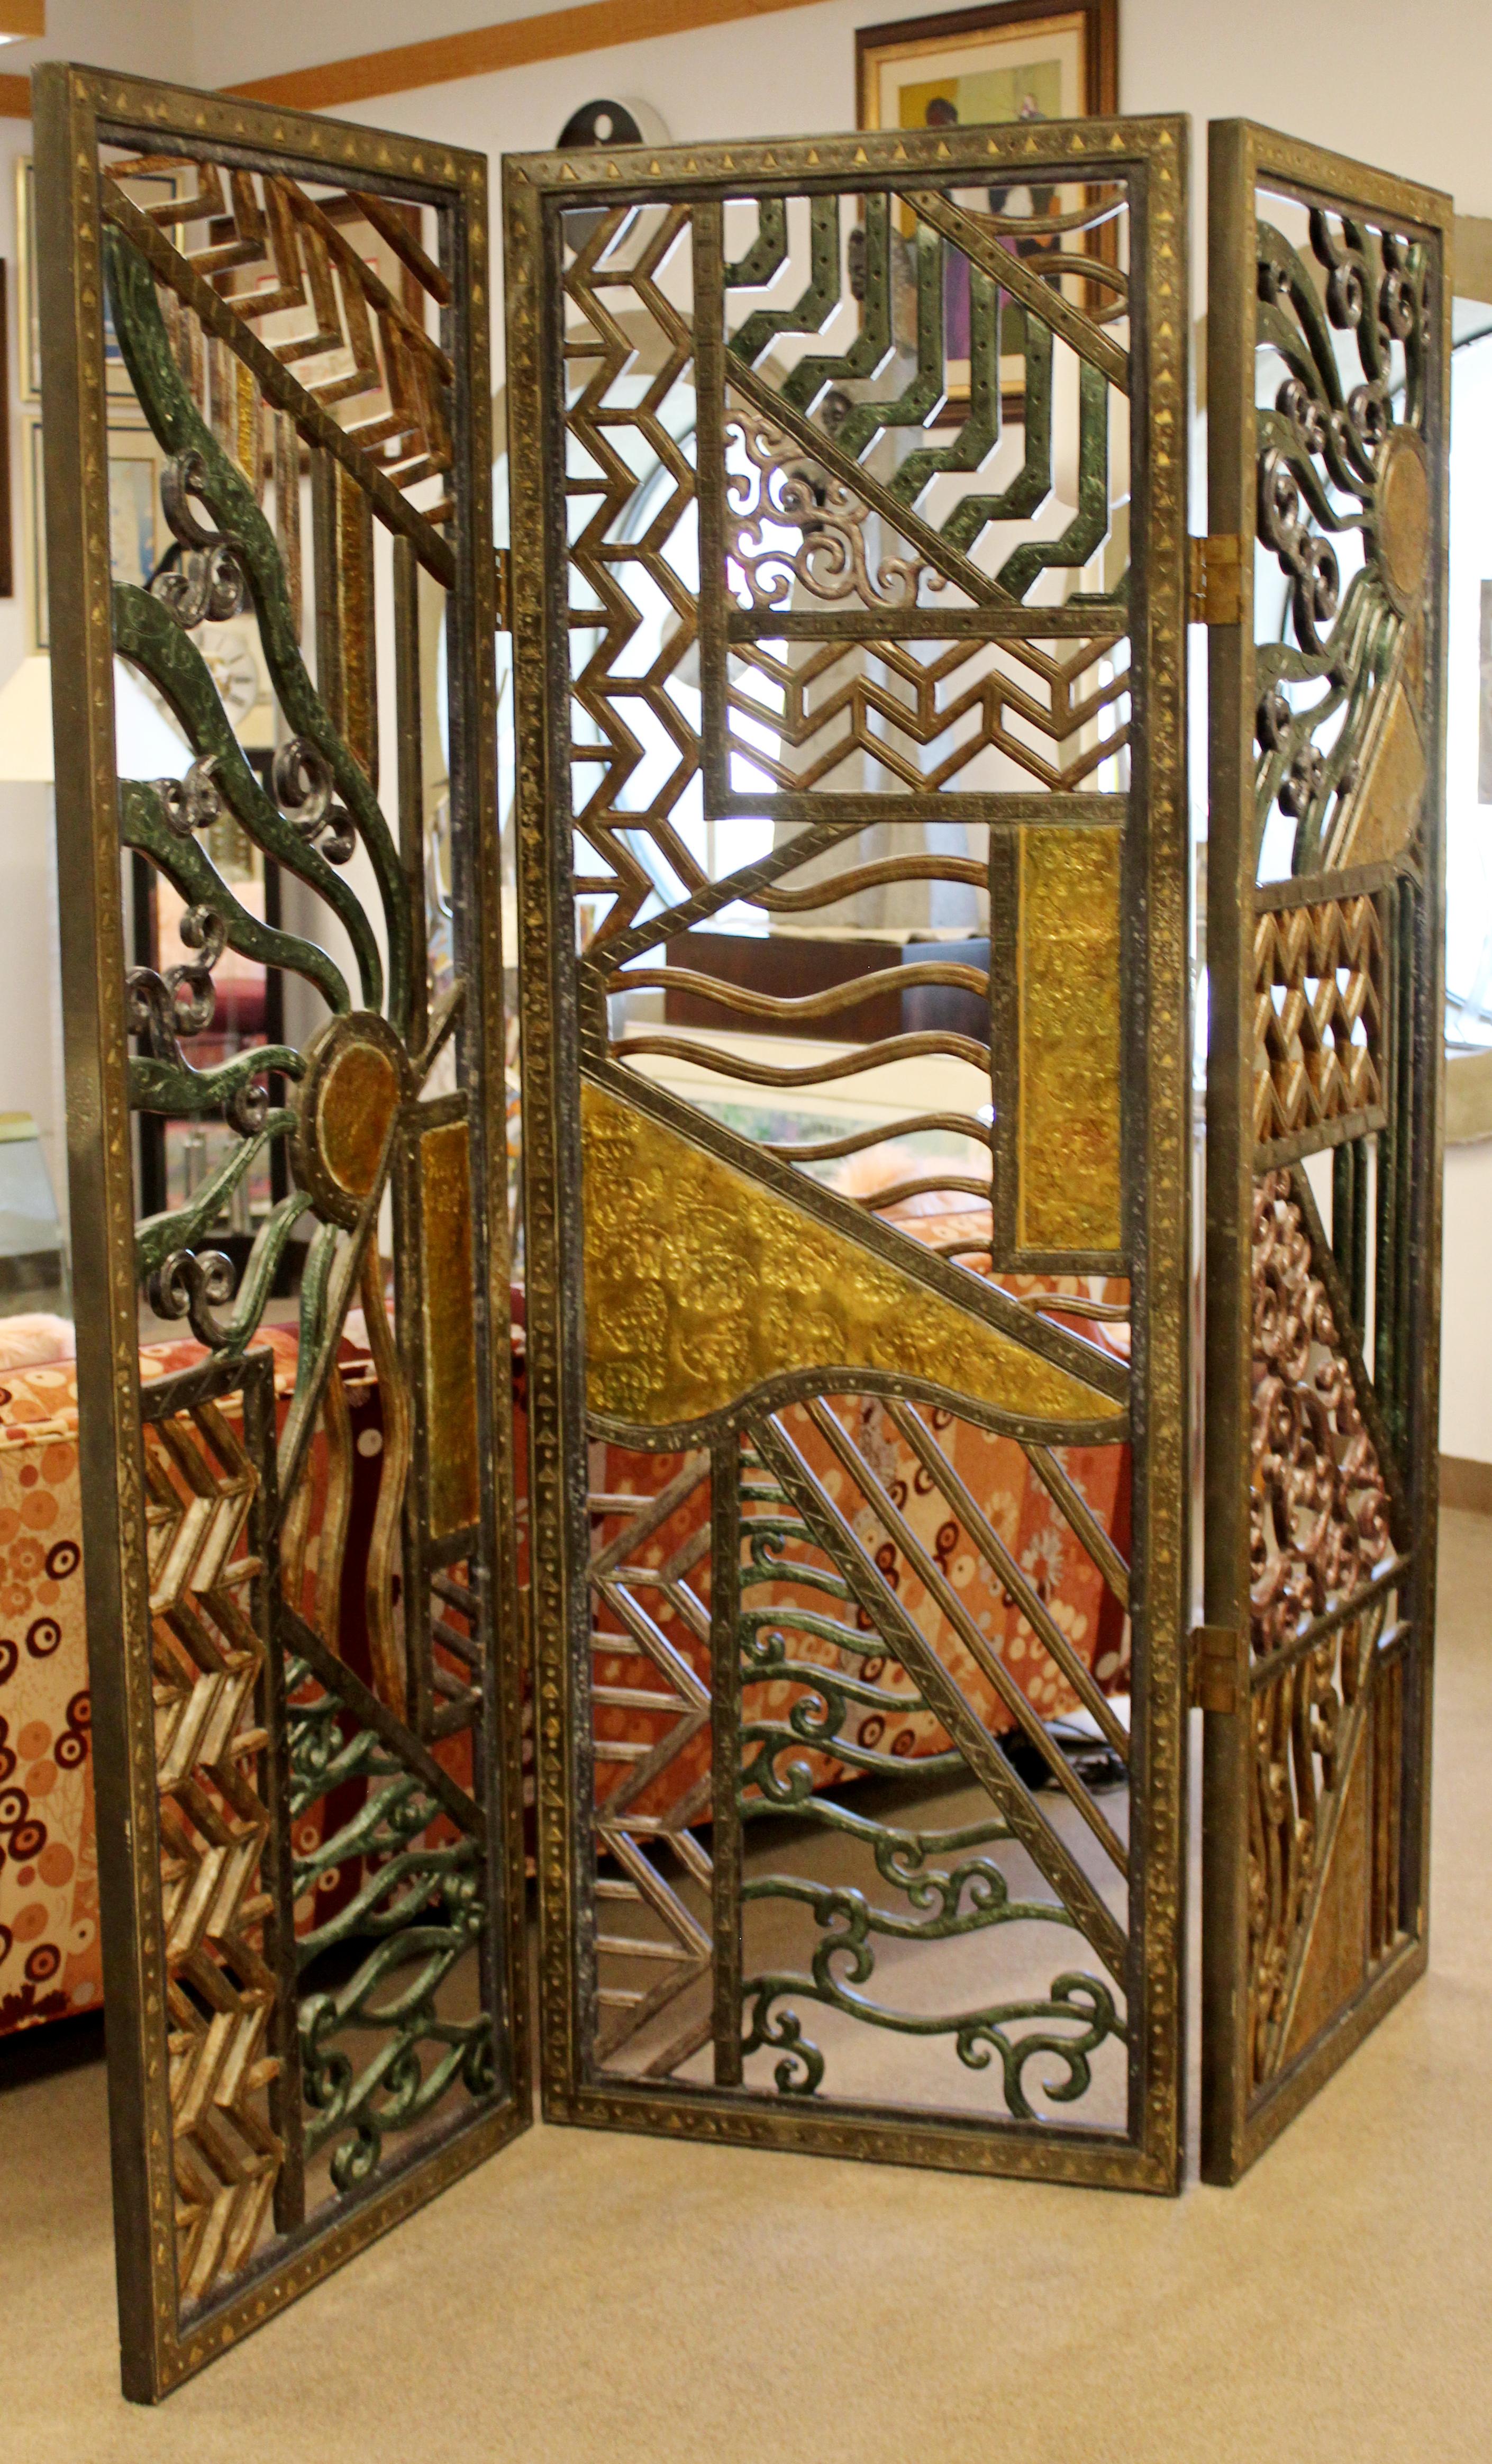 For your consideration is a fabulous, three-panel, free standing room divider screen, made of hand tooled metal. In excellent condition. The dimensions are 72.5